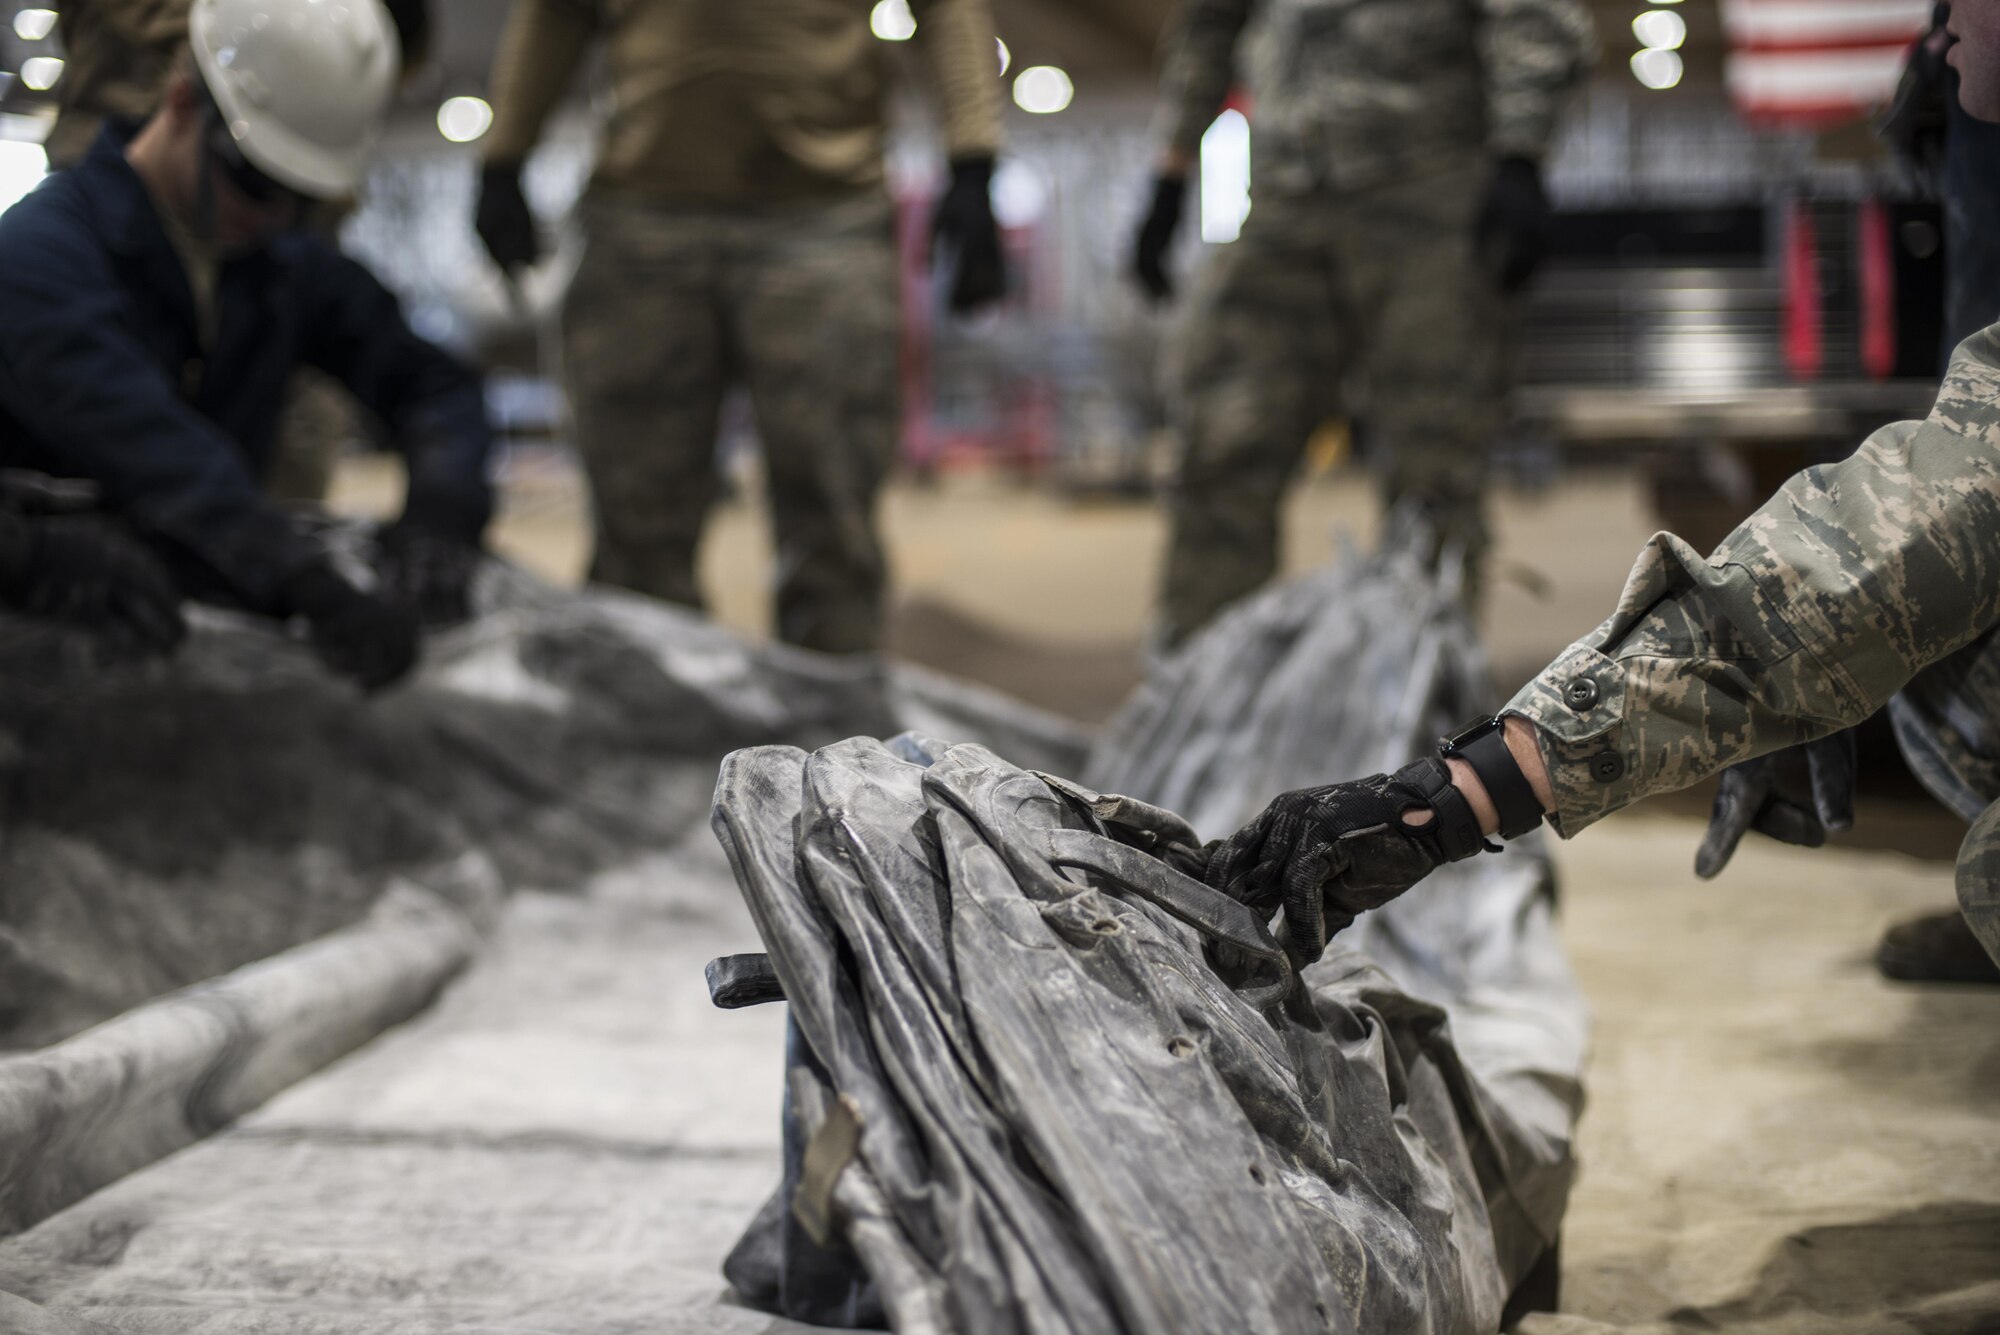 Airmen with the 35th Maintenance Squadron crashed, damaged, disabled aircraft recovery unit inspect a lifting bag at Misawa Air Base, Japan, Jan. 28, 2017. CDDAR conducts training annually to ensure Airmen stay proficient in case of a real-world aircraft emergency. Lifting bags are used to elevate an aircraft approximately 18 inches off the ground, enabling the landing gear to be dislodged. (U.S. Air Force photo by Senior Airman Brittany A. Chase)